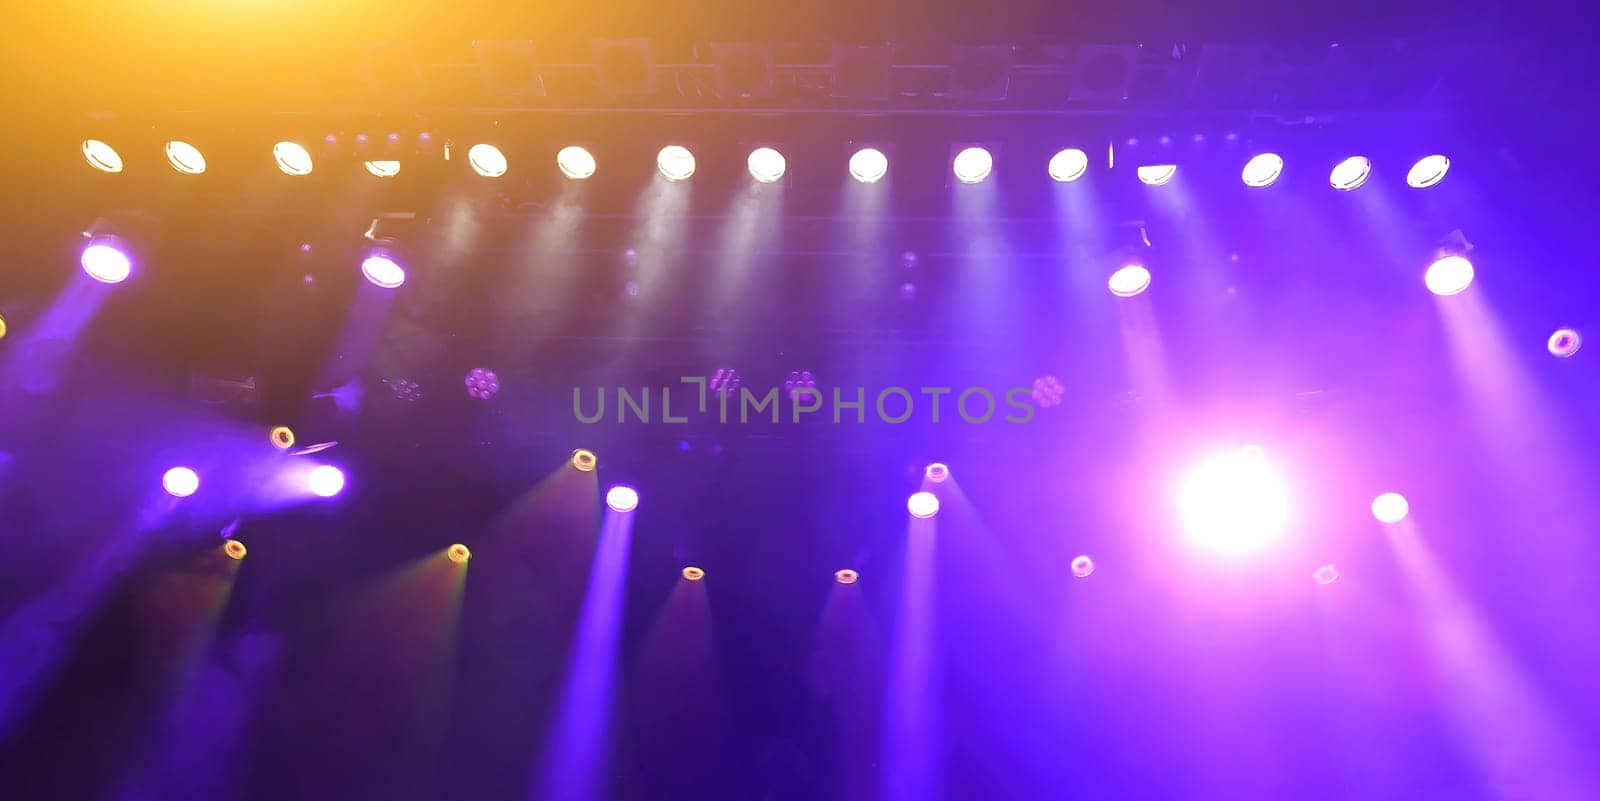 glowing purple atmospheric abstract background of concert spotlights with light and Mist by GekaSkr